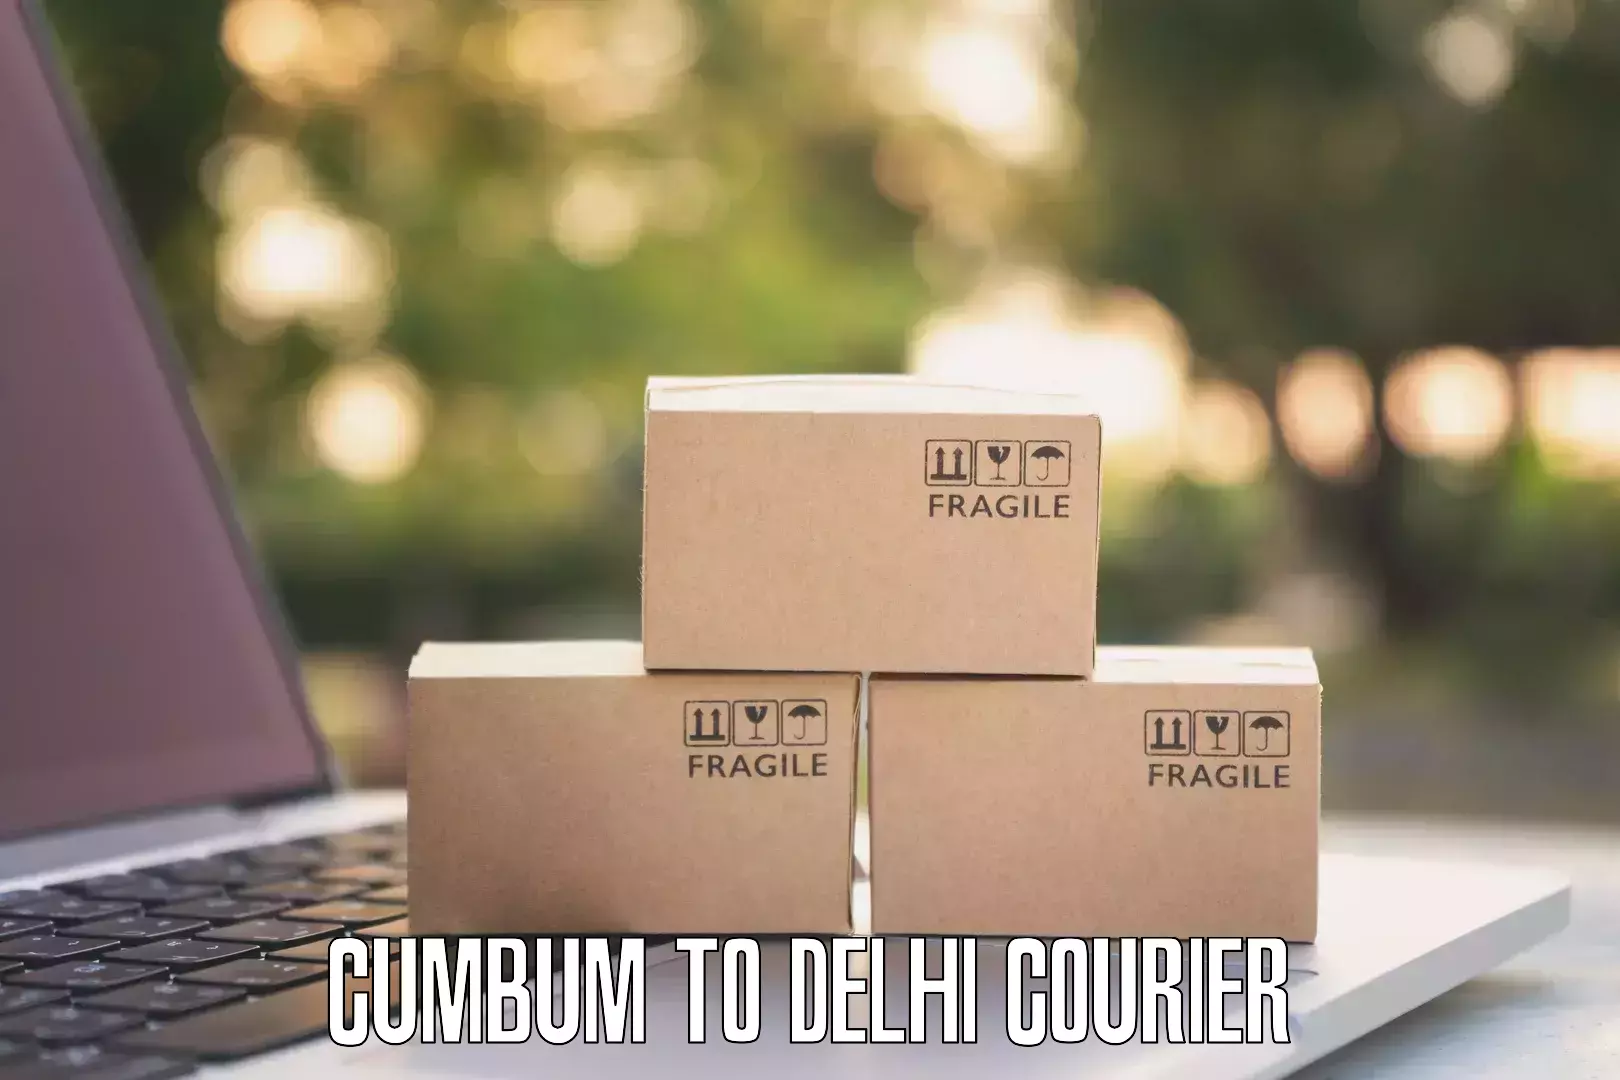 Expedited shipping methods Cumbum to NCR